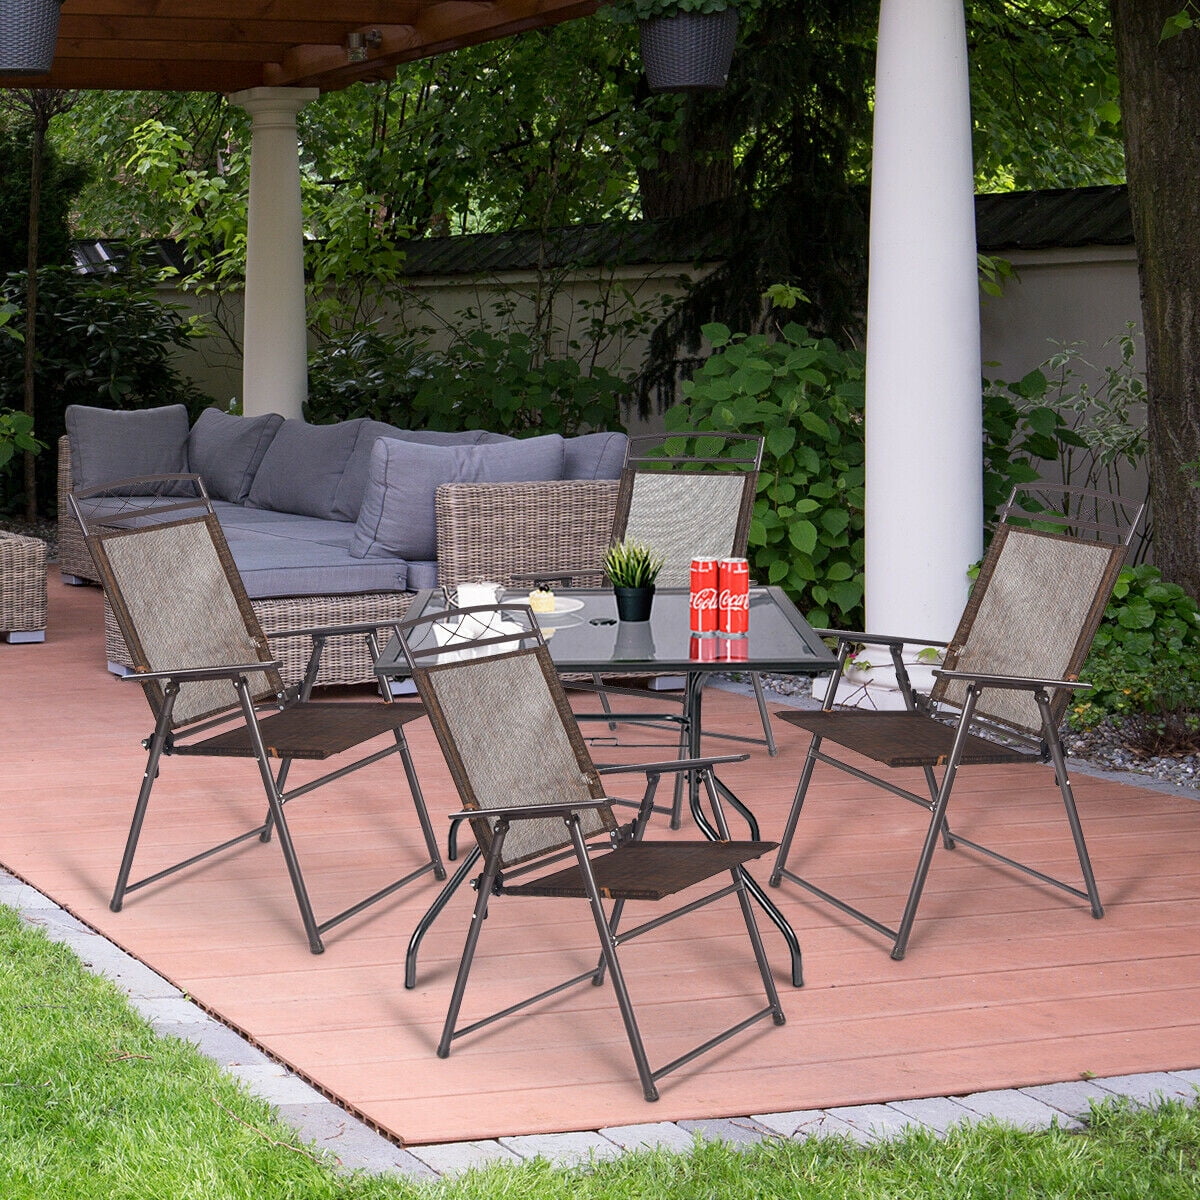 Set of 4 Patio Folding Sling Chairs Steel Textilene Camping Deck Garden Pool New 